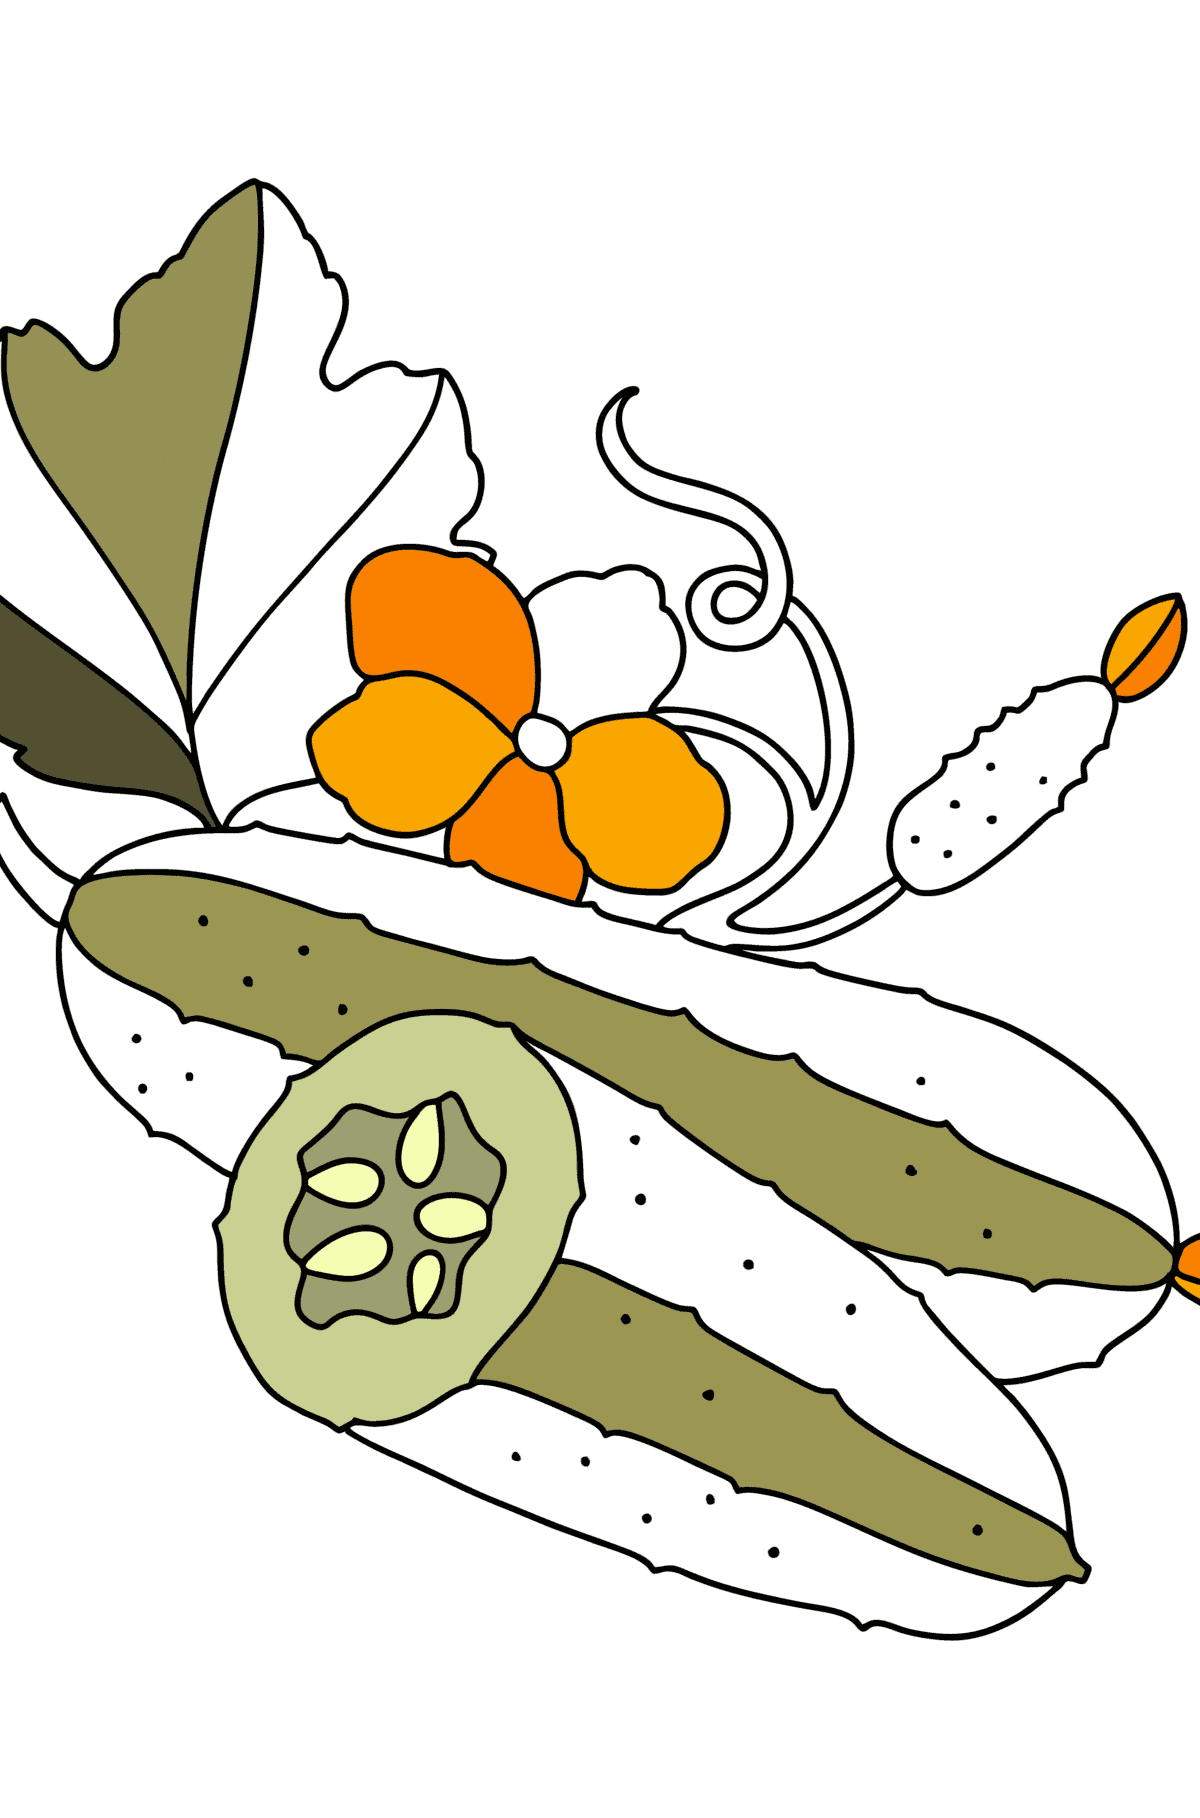 Tasty cucumbers сoloring page - Coloring Pages for Kids